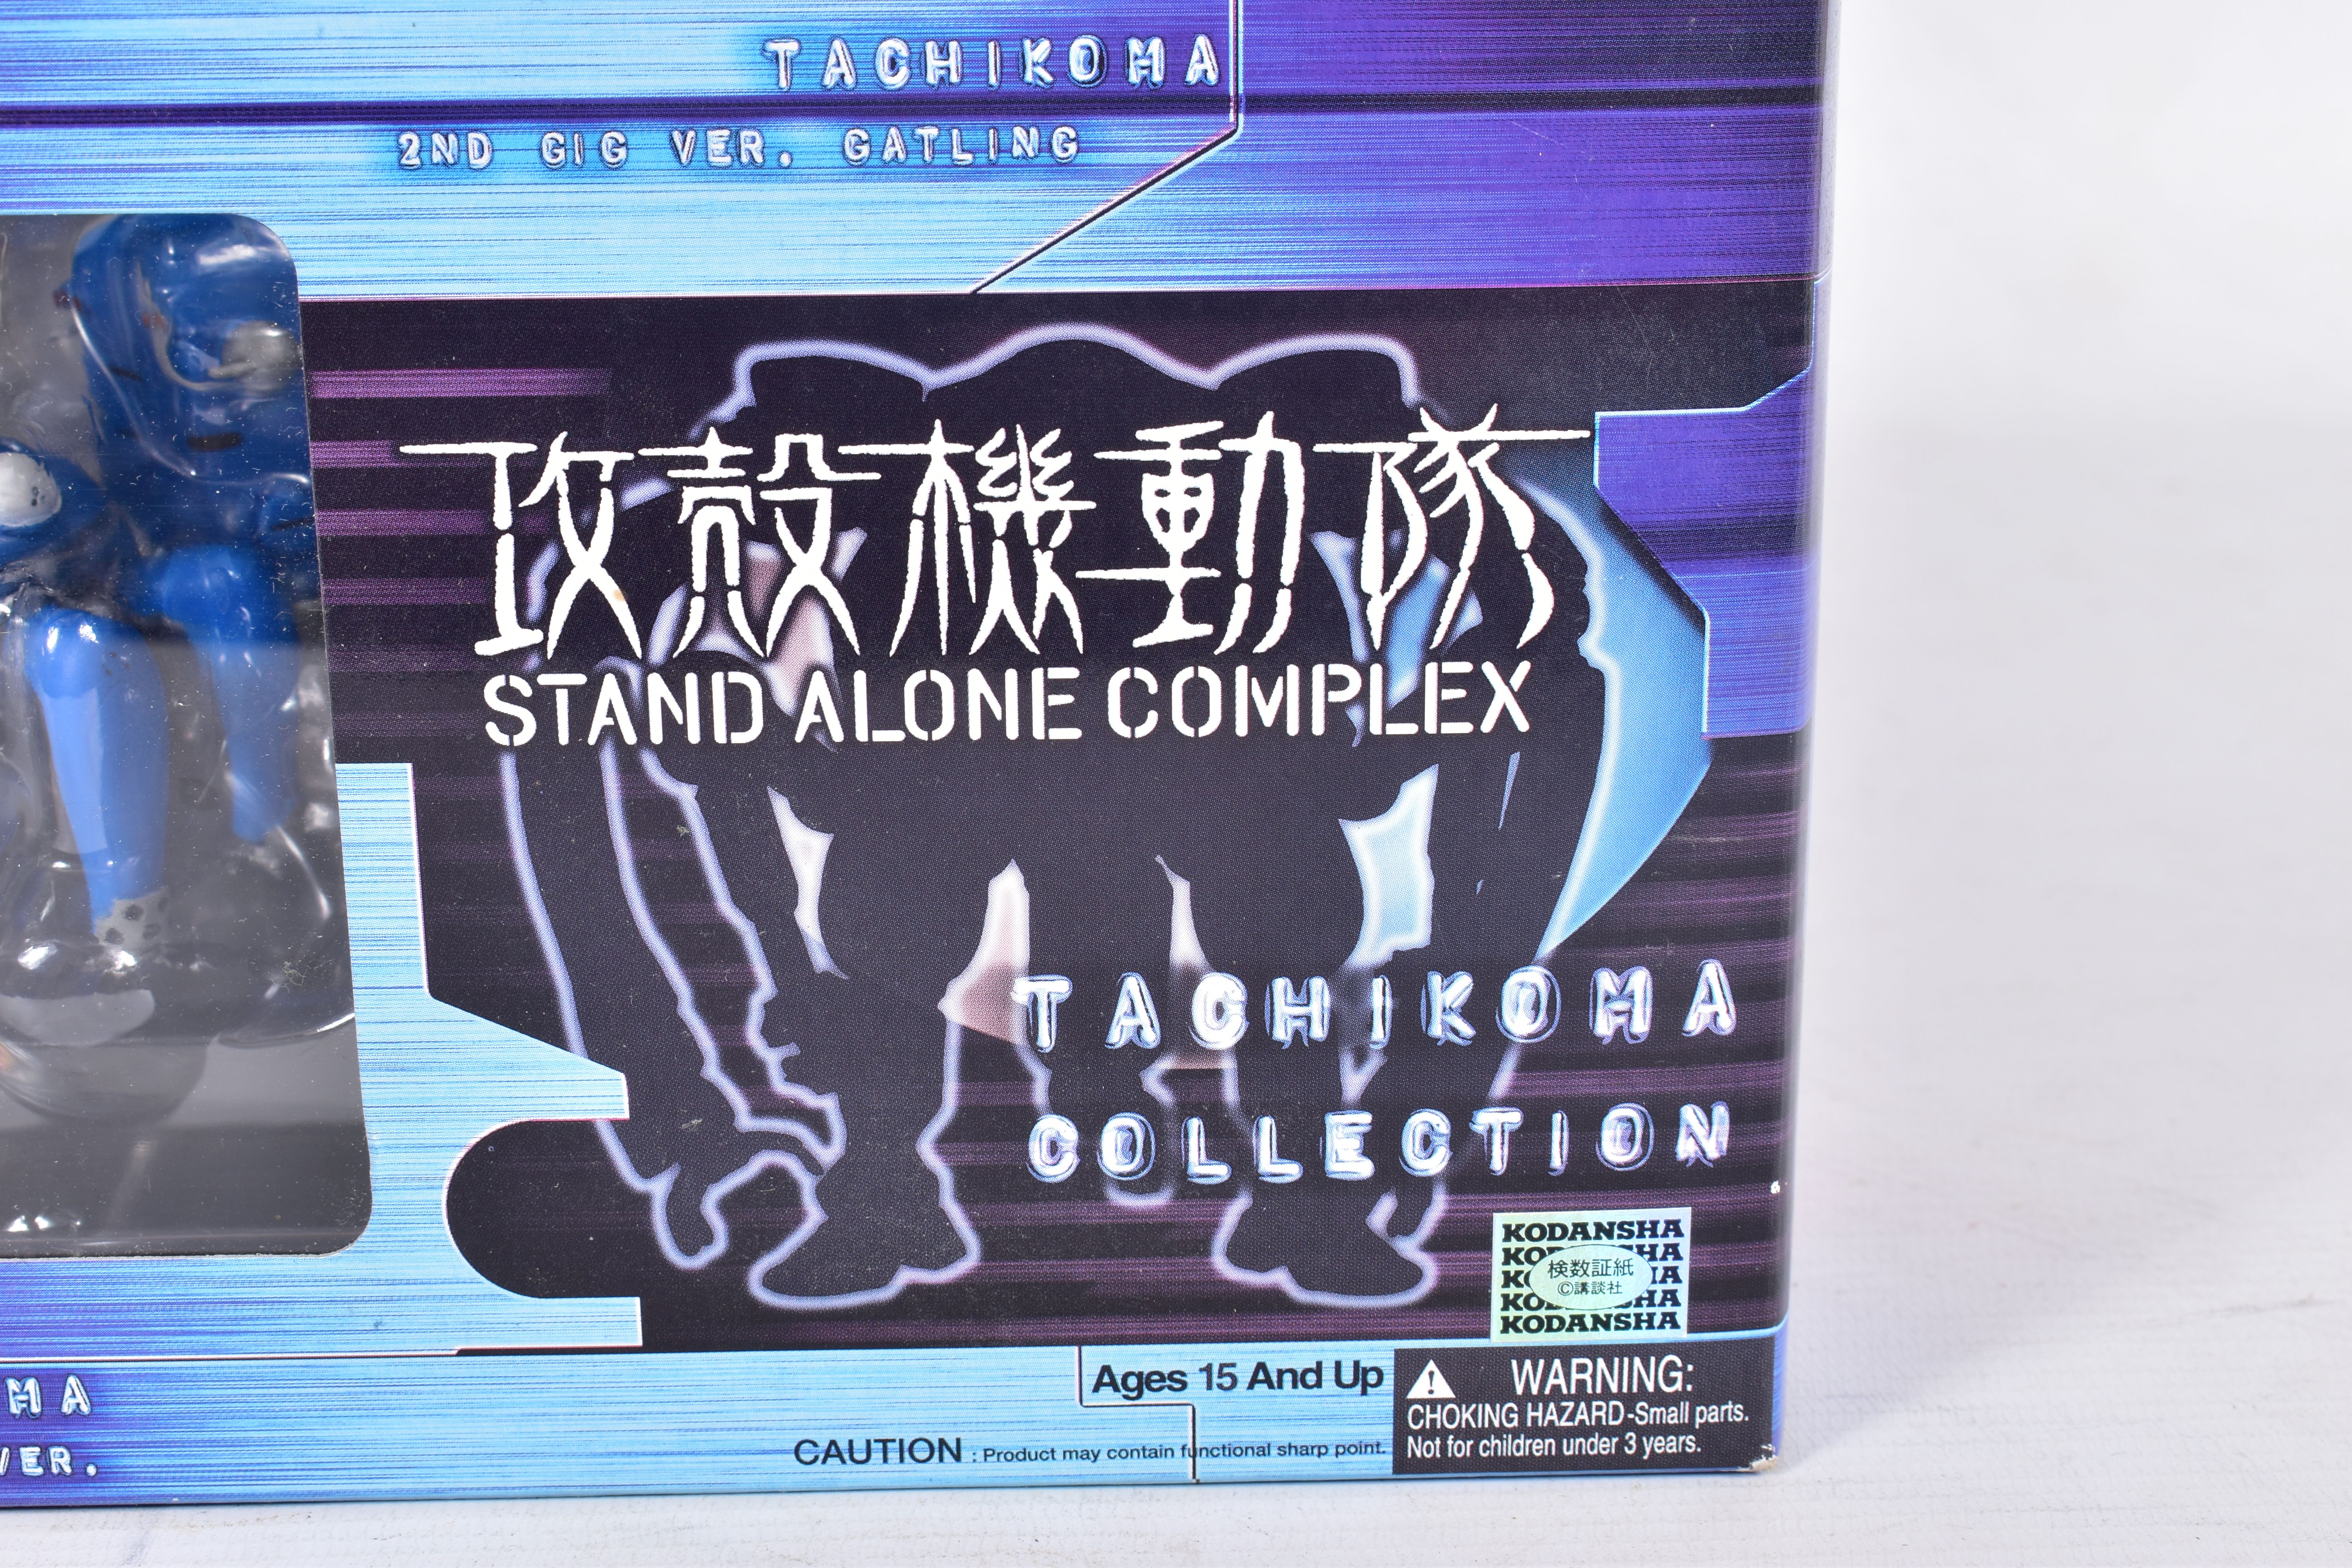 A BOXED SET OF ORGANIC/KODANSHA TACHIKOMA COLLECTION FIGURES, Stand Alone Complex, seven figures - Image 2 of 4